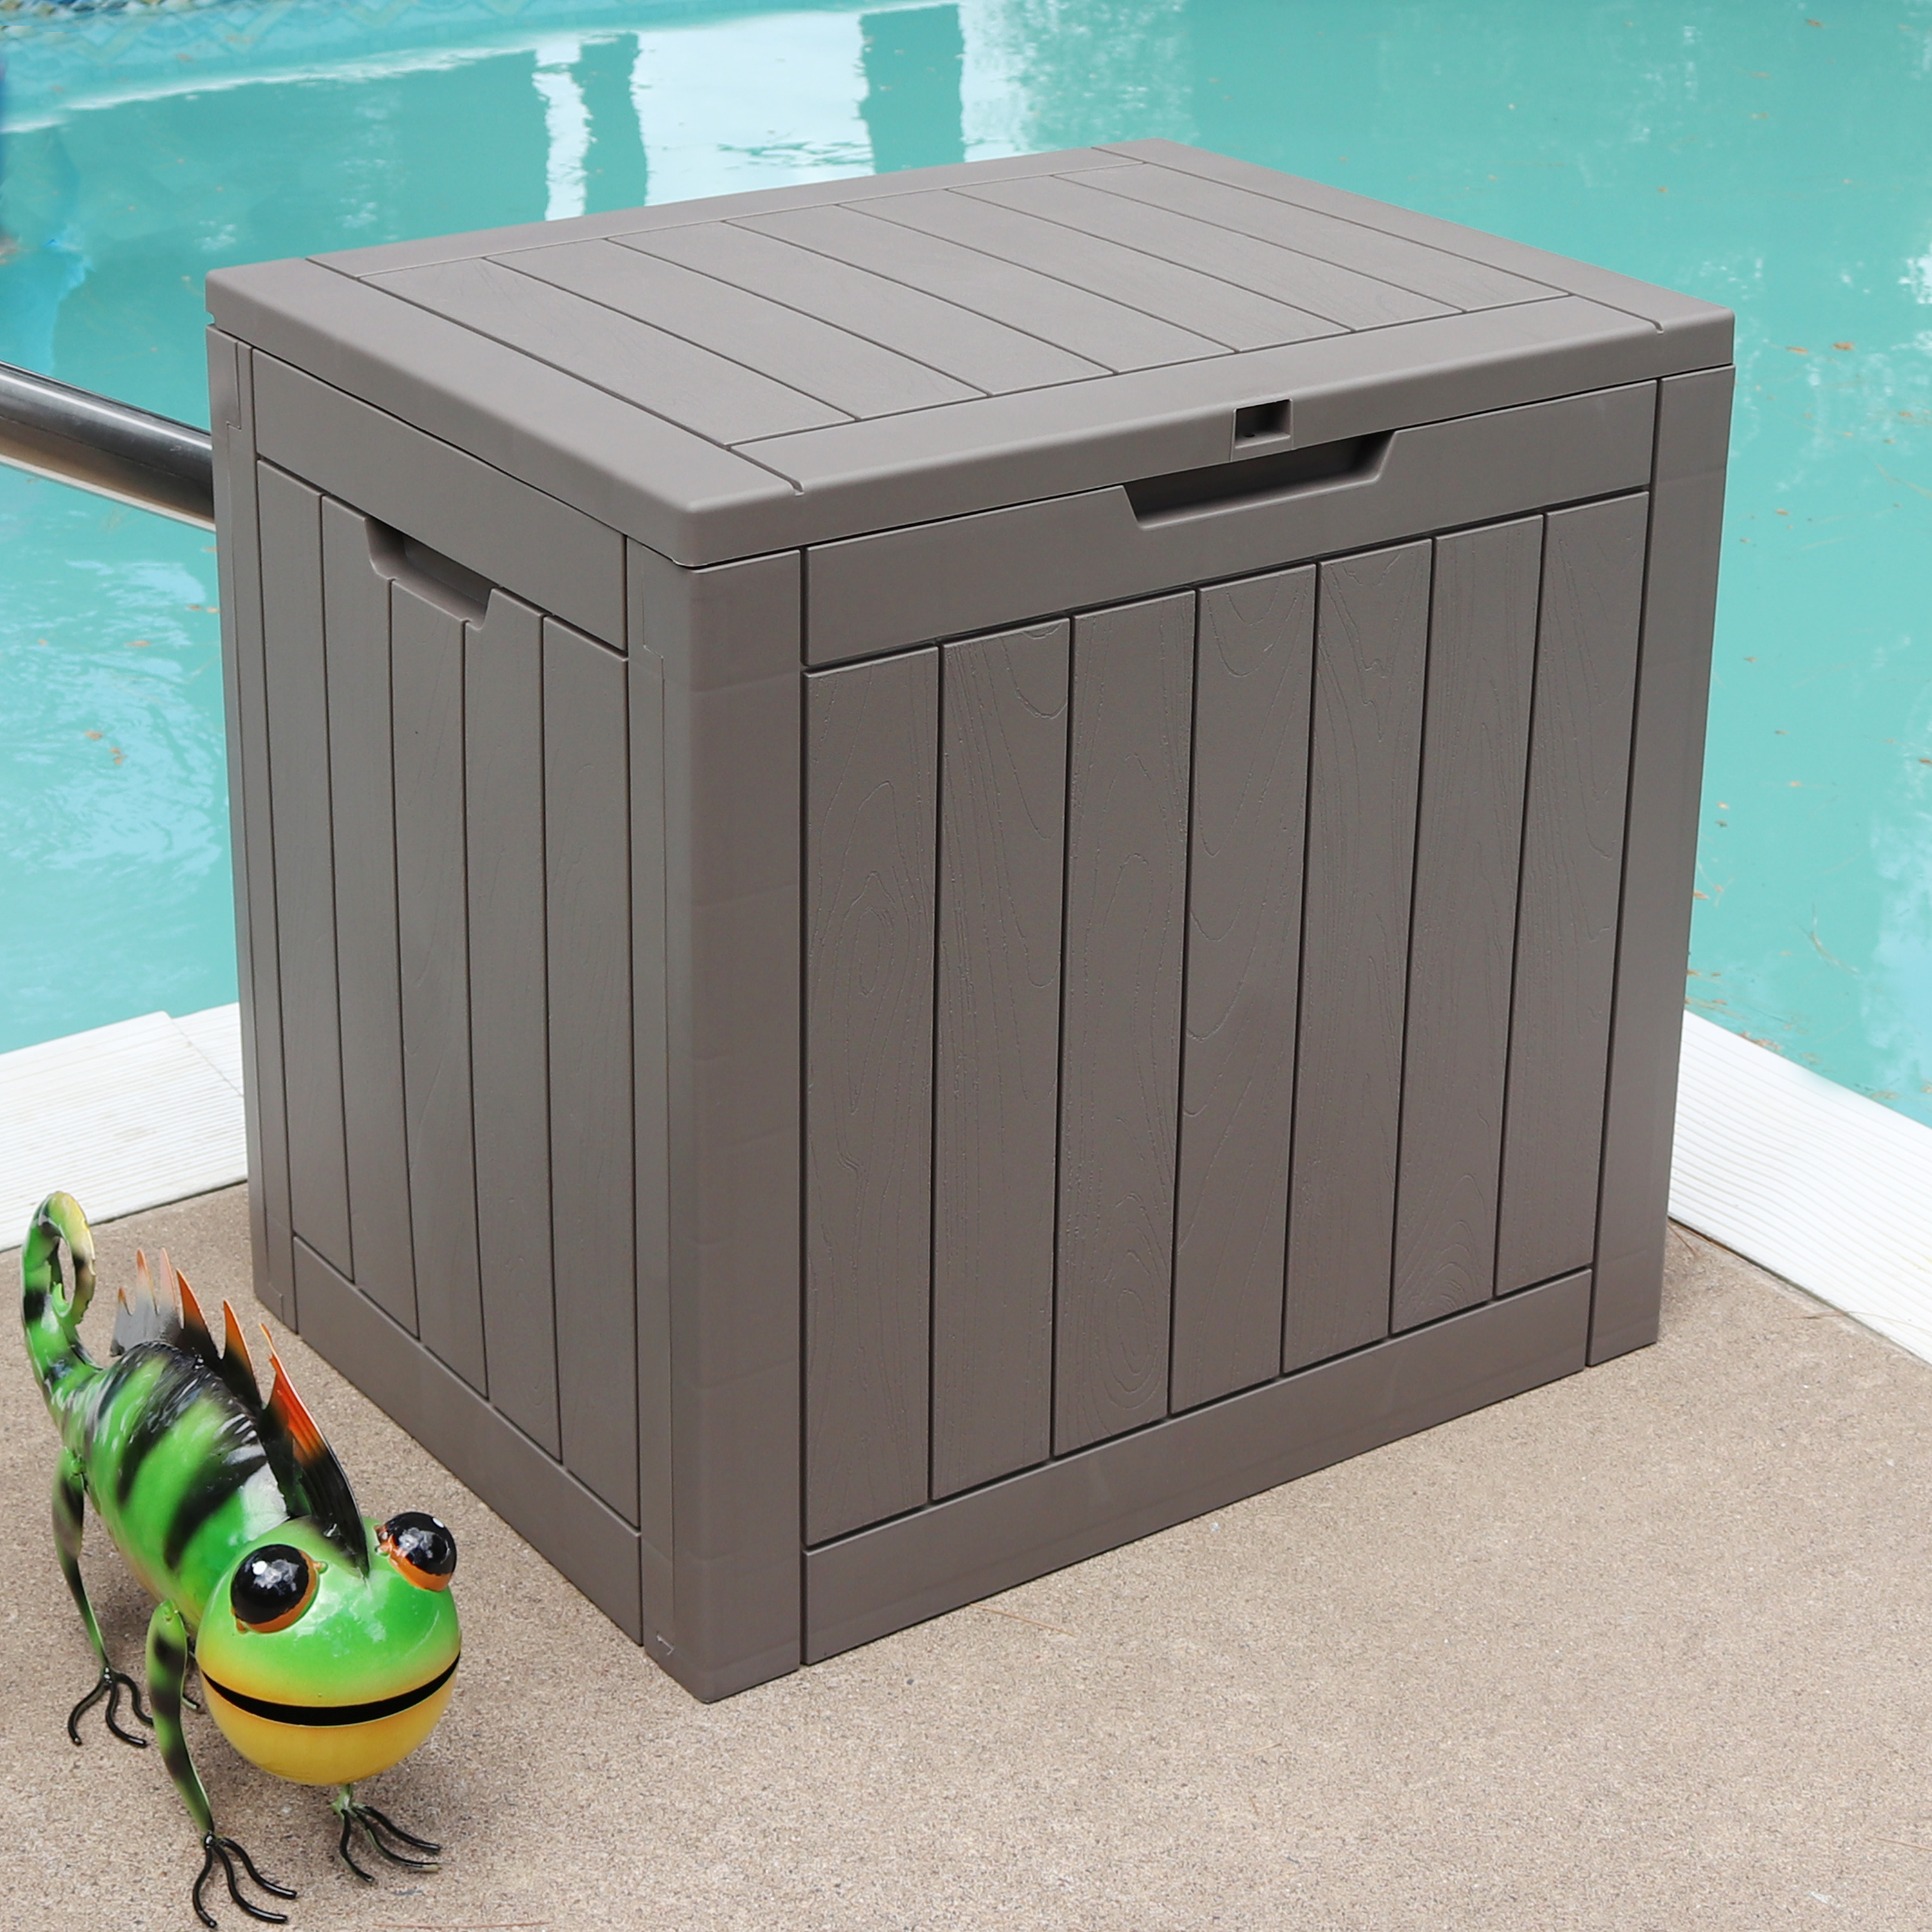 Sunnydaze Small Deck Box with Storage and Lockable Lid - 32 Gal. - Driftwood - image 2 of 15